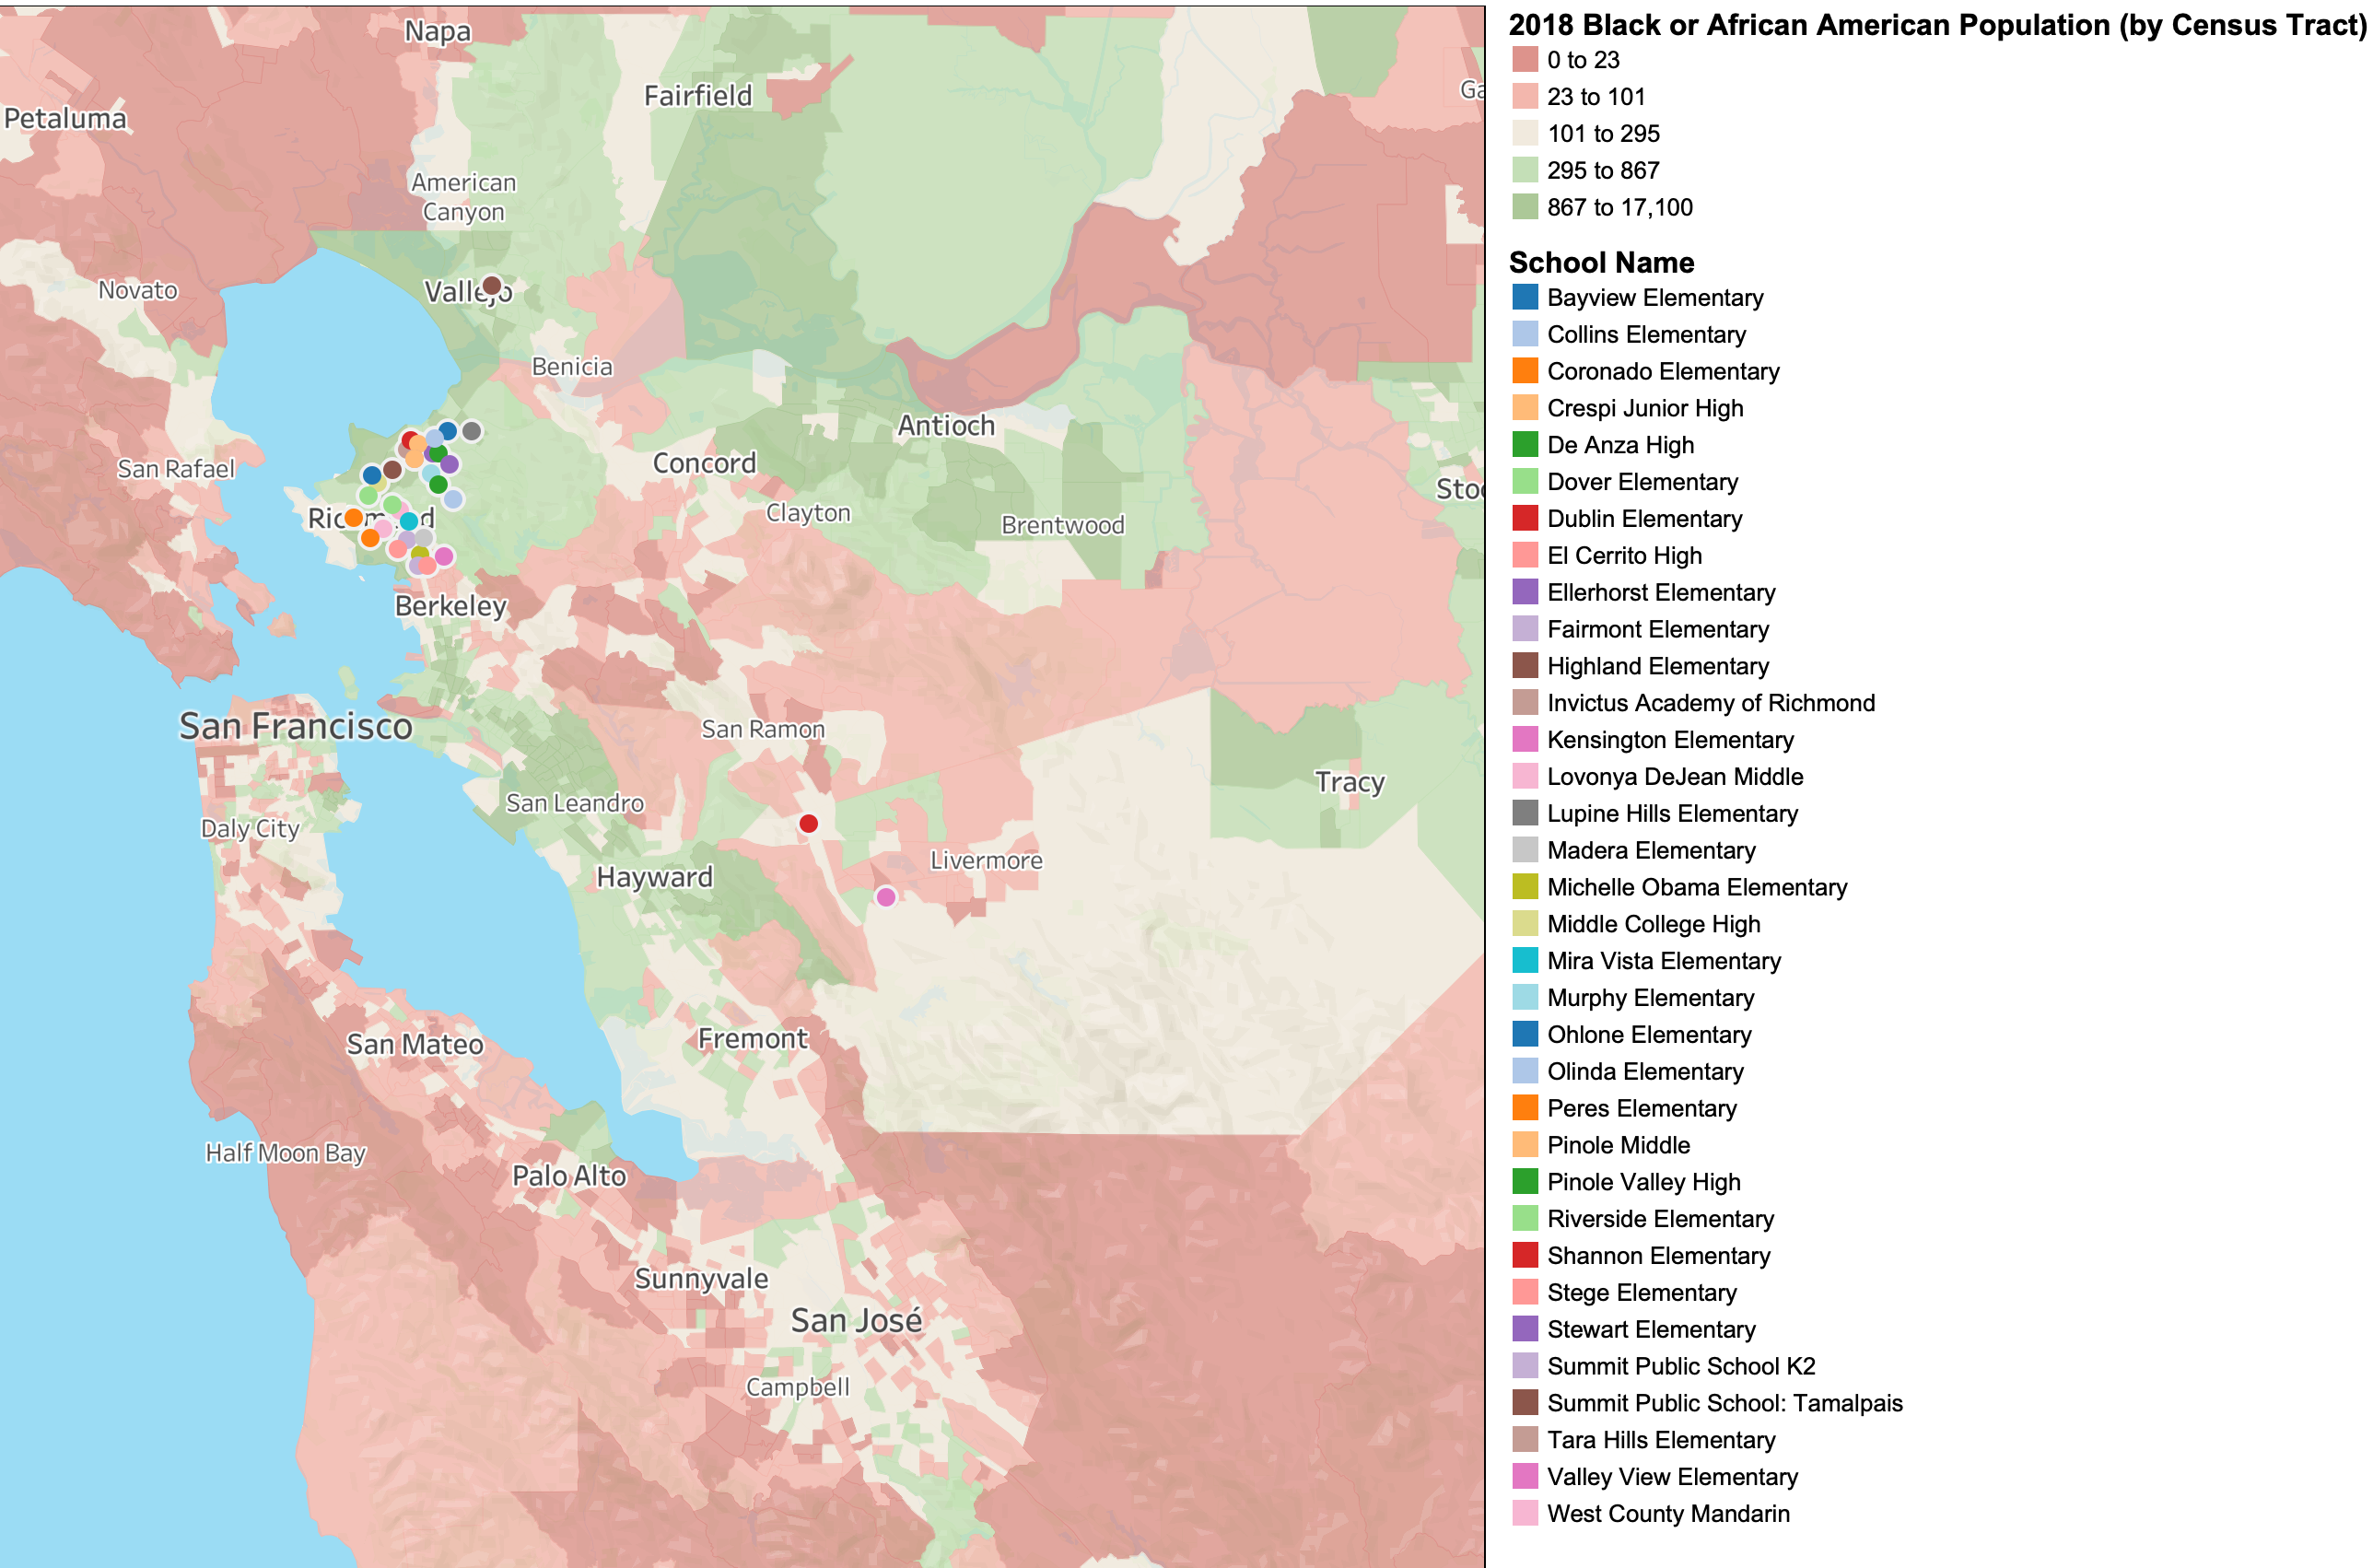 Map of African American demographics in the Bay Area